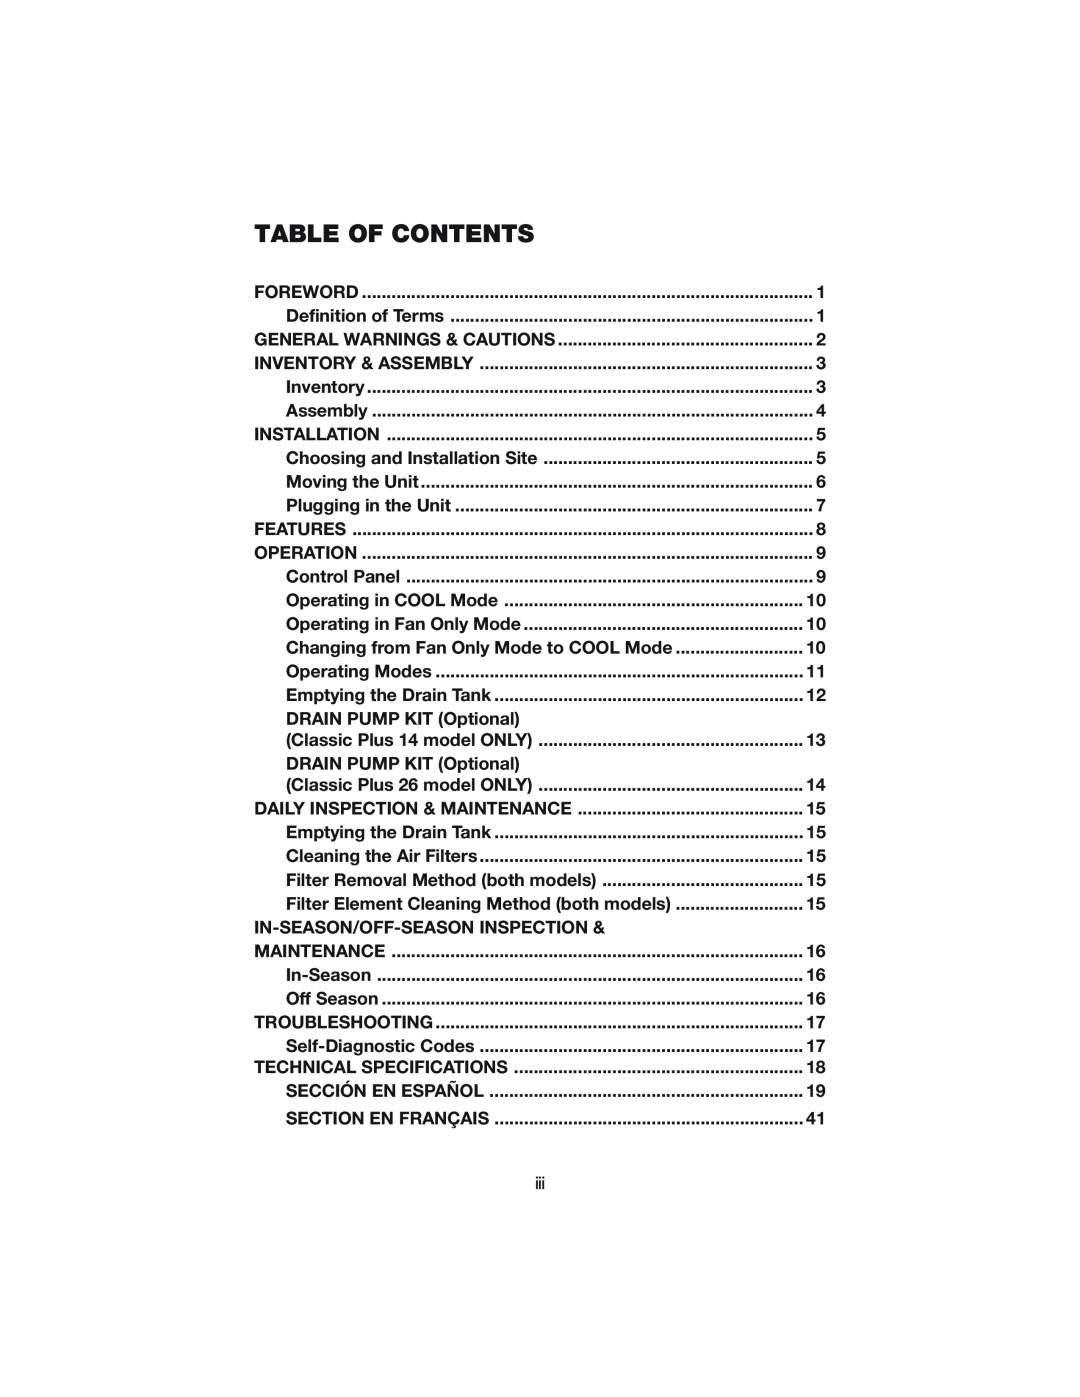 Denso CLASSIC PLUS 14, CLASSIC PLUS 26 operation manual Table Of Contents 